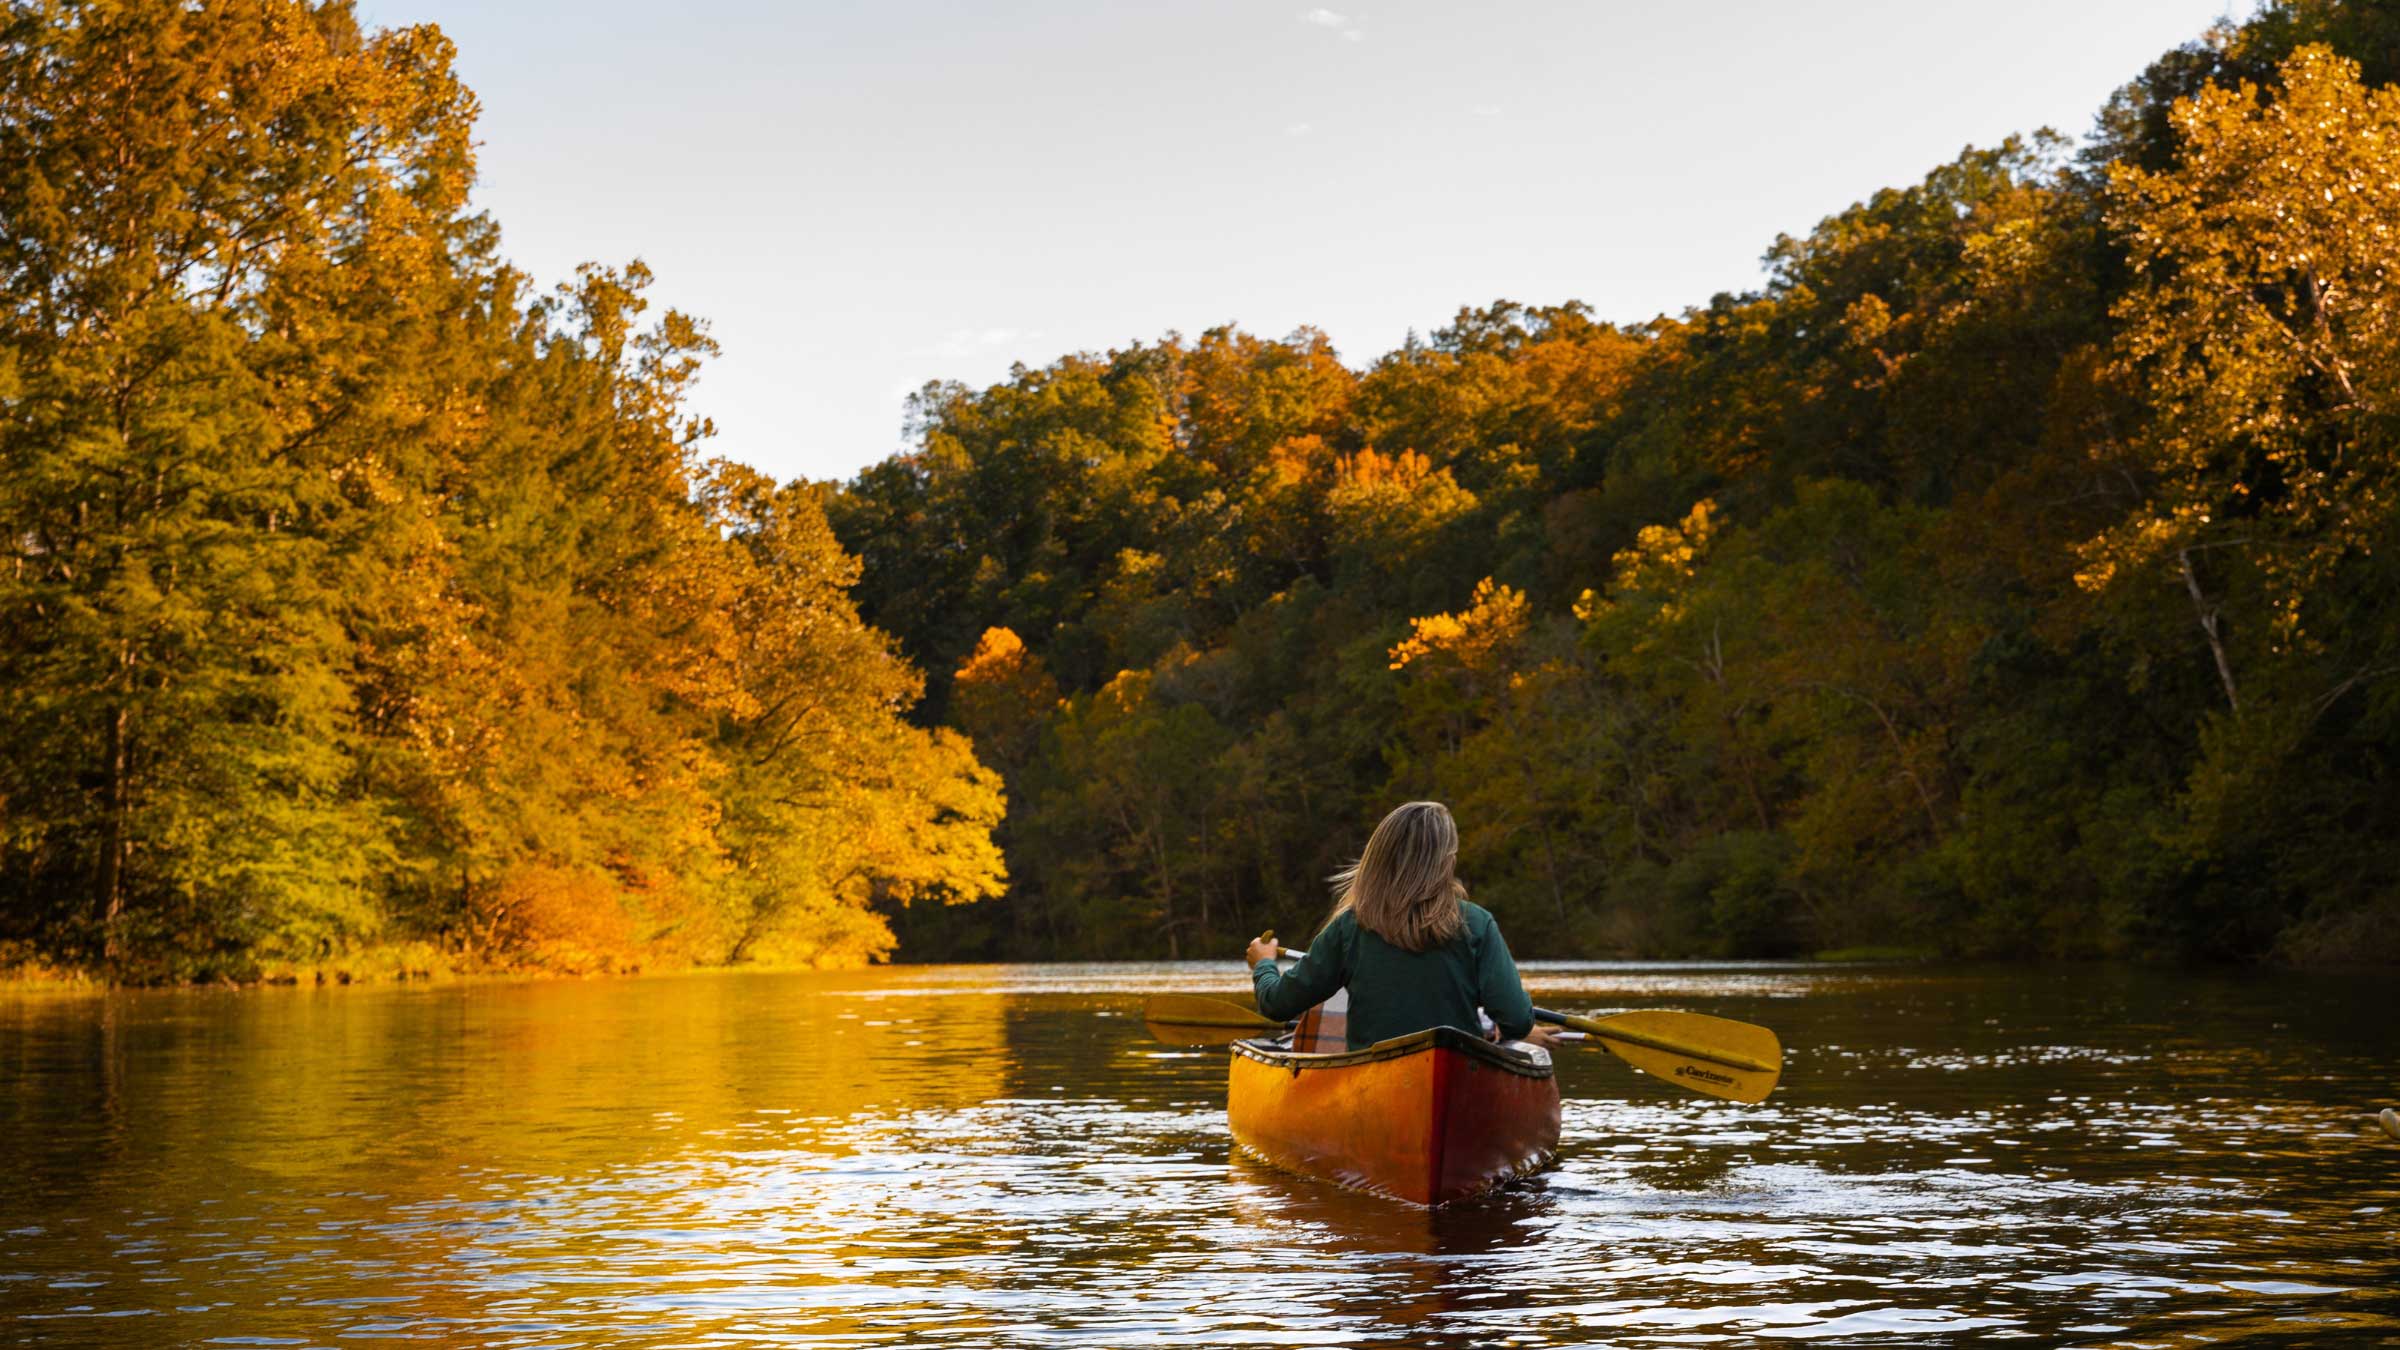 A woman kayaks alone in Beavers Bend State Park during the autumn fall season